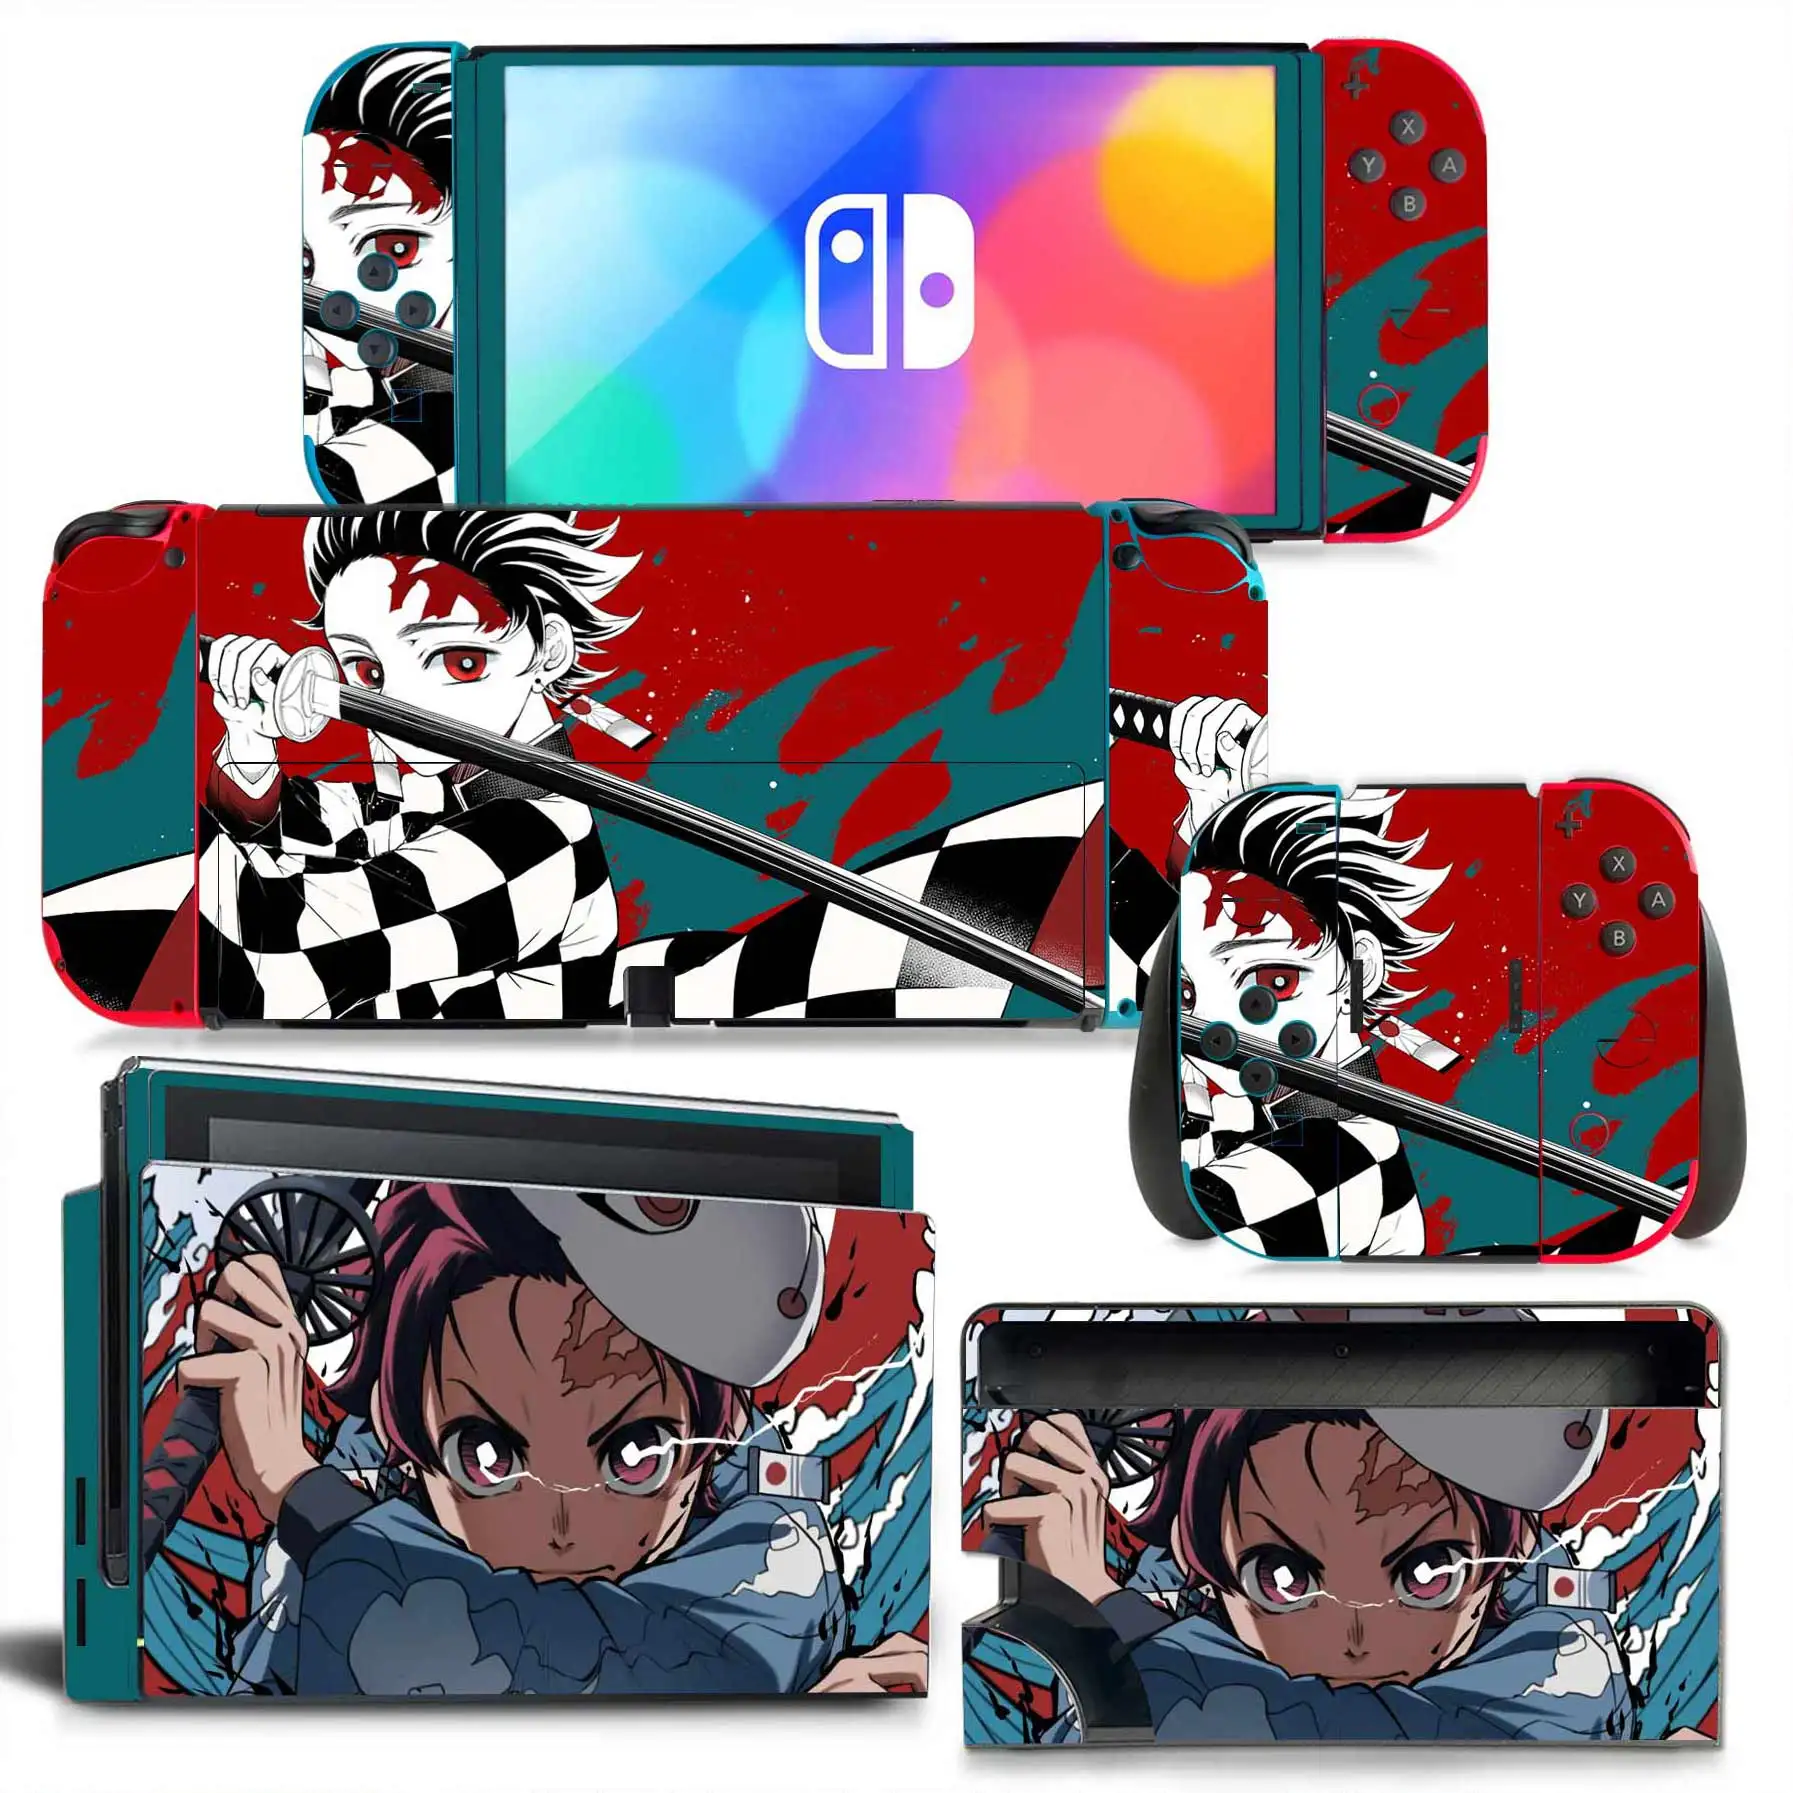 Demon Slayer Switch Oled Skin Sticker Decal Cover for Switch Oled Console Skin Dock Joy Con Wrap Full Wrap Decal NS OLED Vinyl